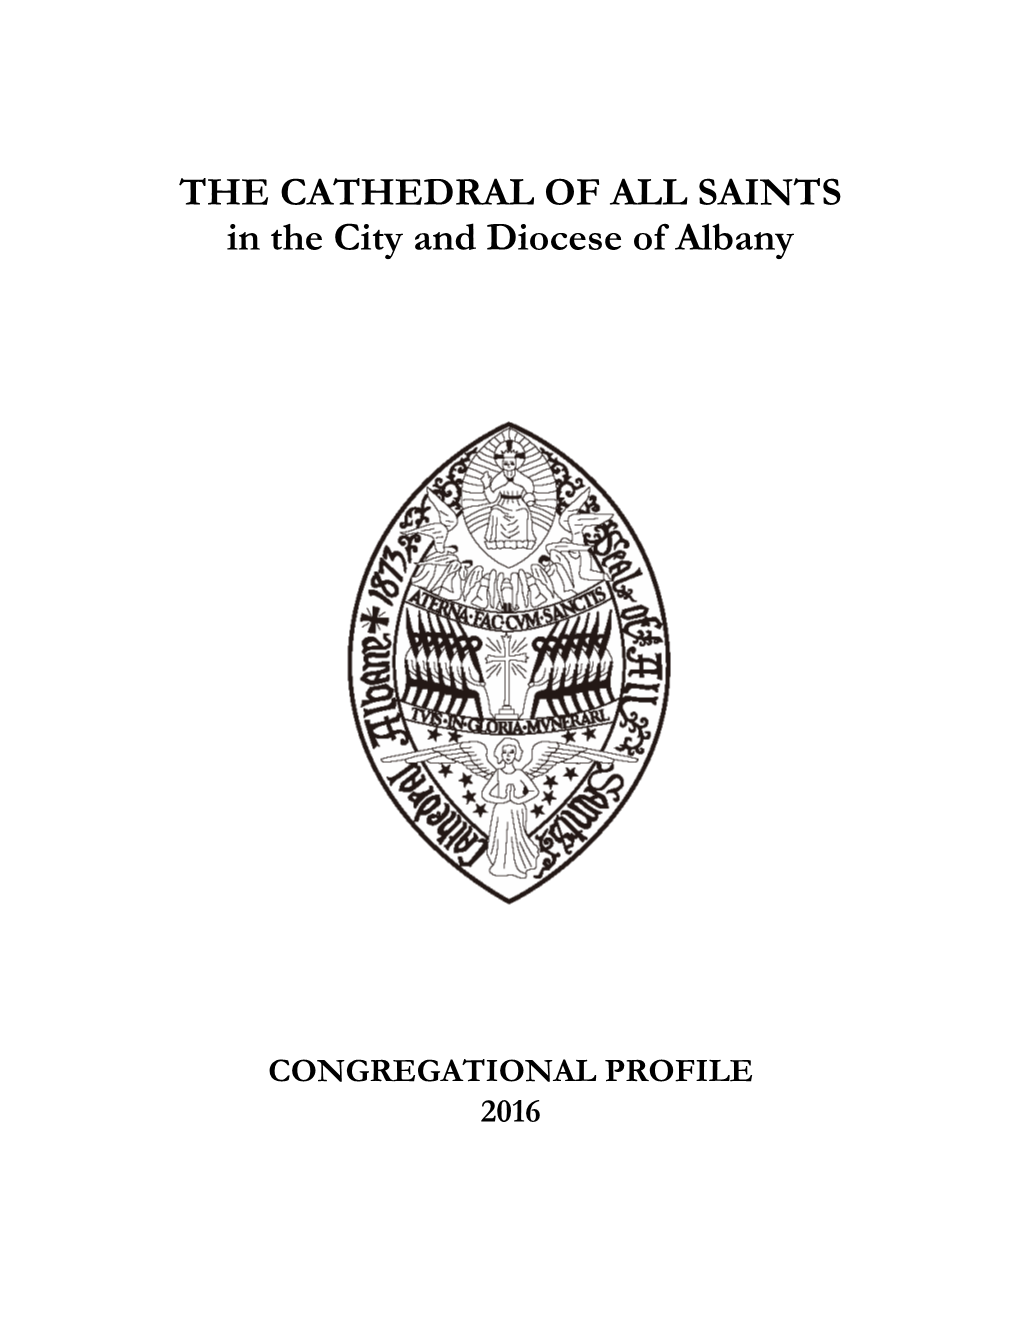 THE CATHEDRAL of ALL SAINTS in the City and Diocese of Albany